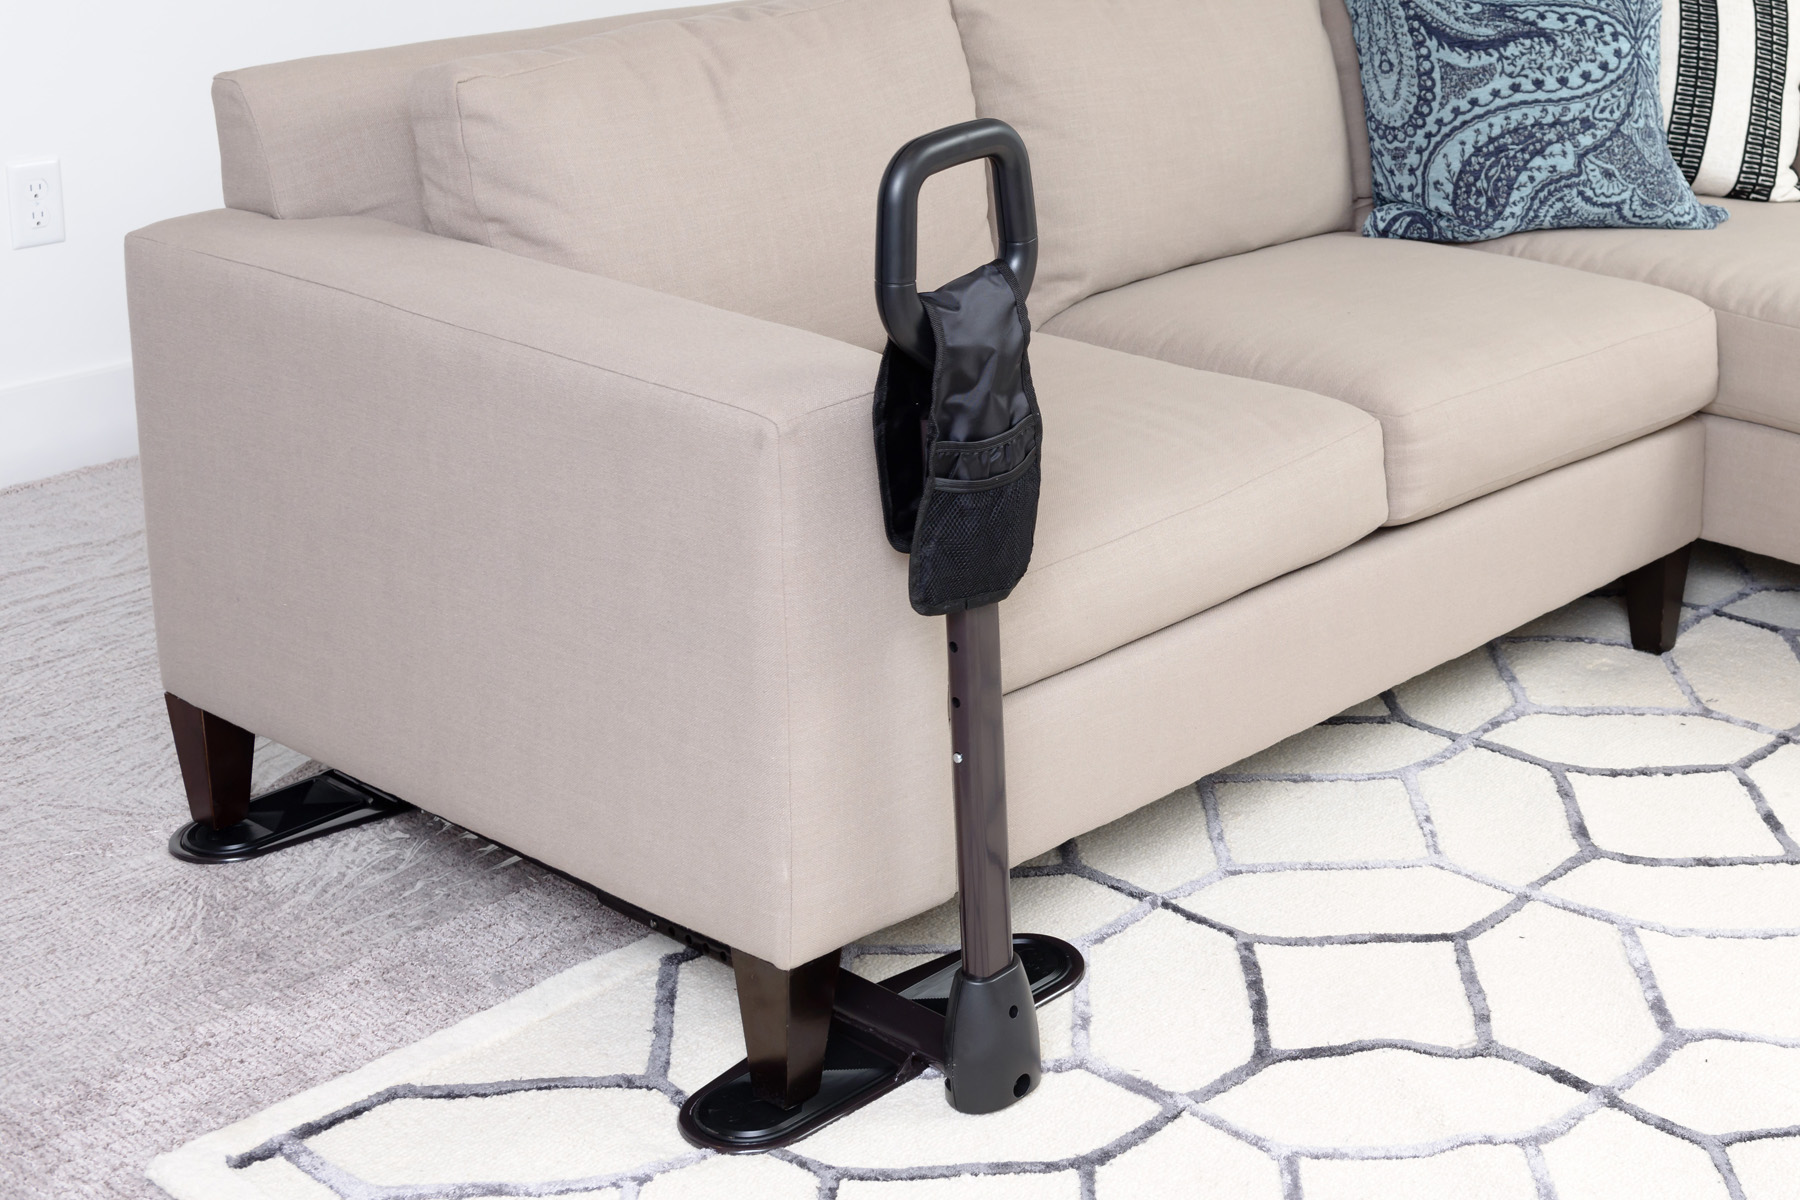 Couch Cane Assembly, Having trouble standing up or sitting down? The Couch  Cane is here for you! It is easy to assemble and adjust perfectly with any  couch or chair. Learn